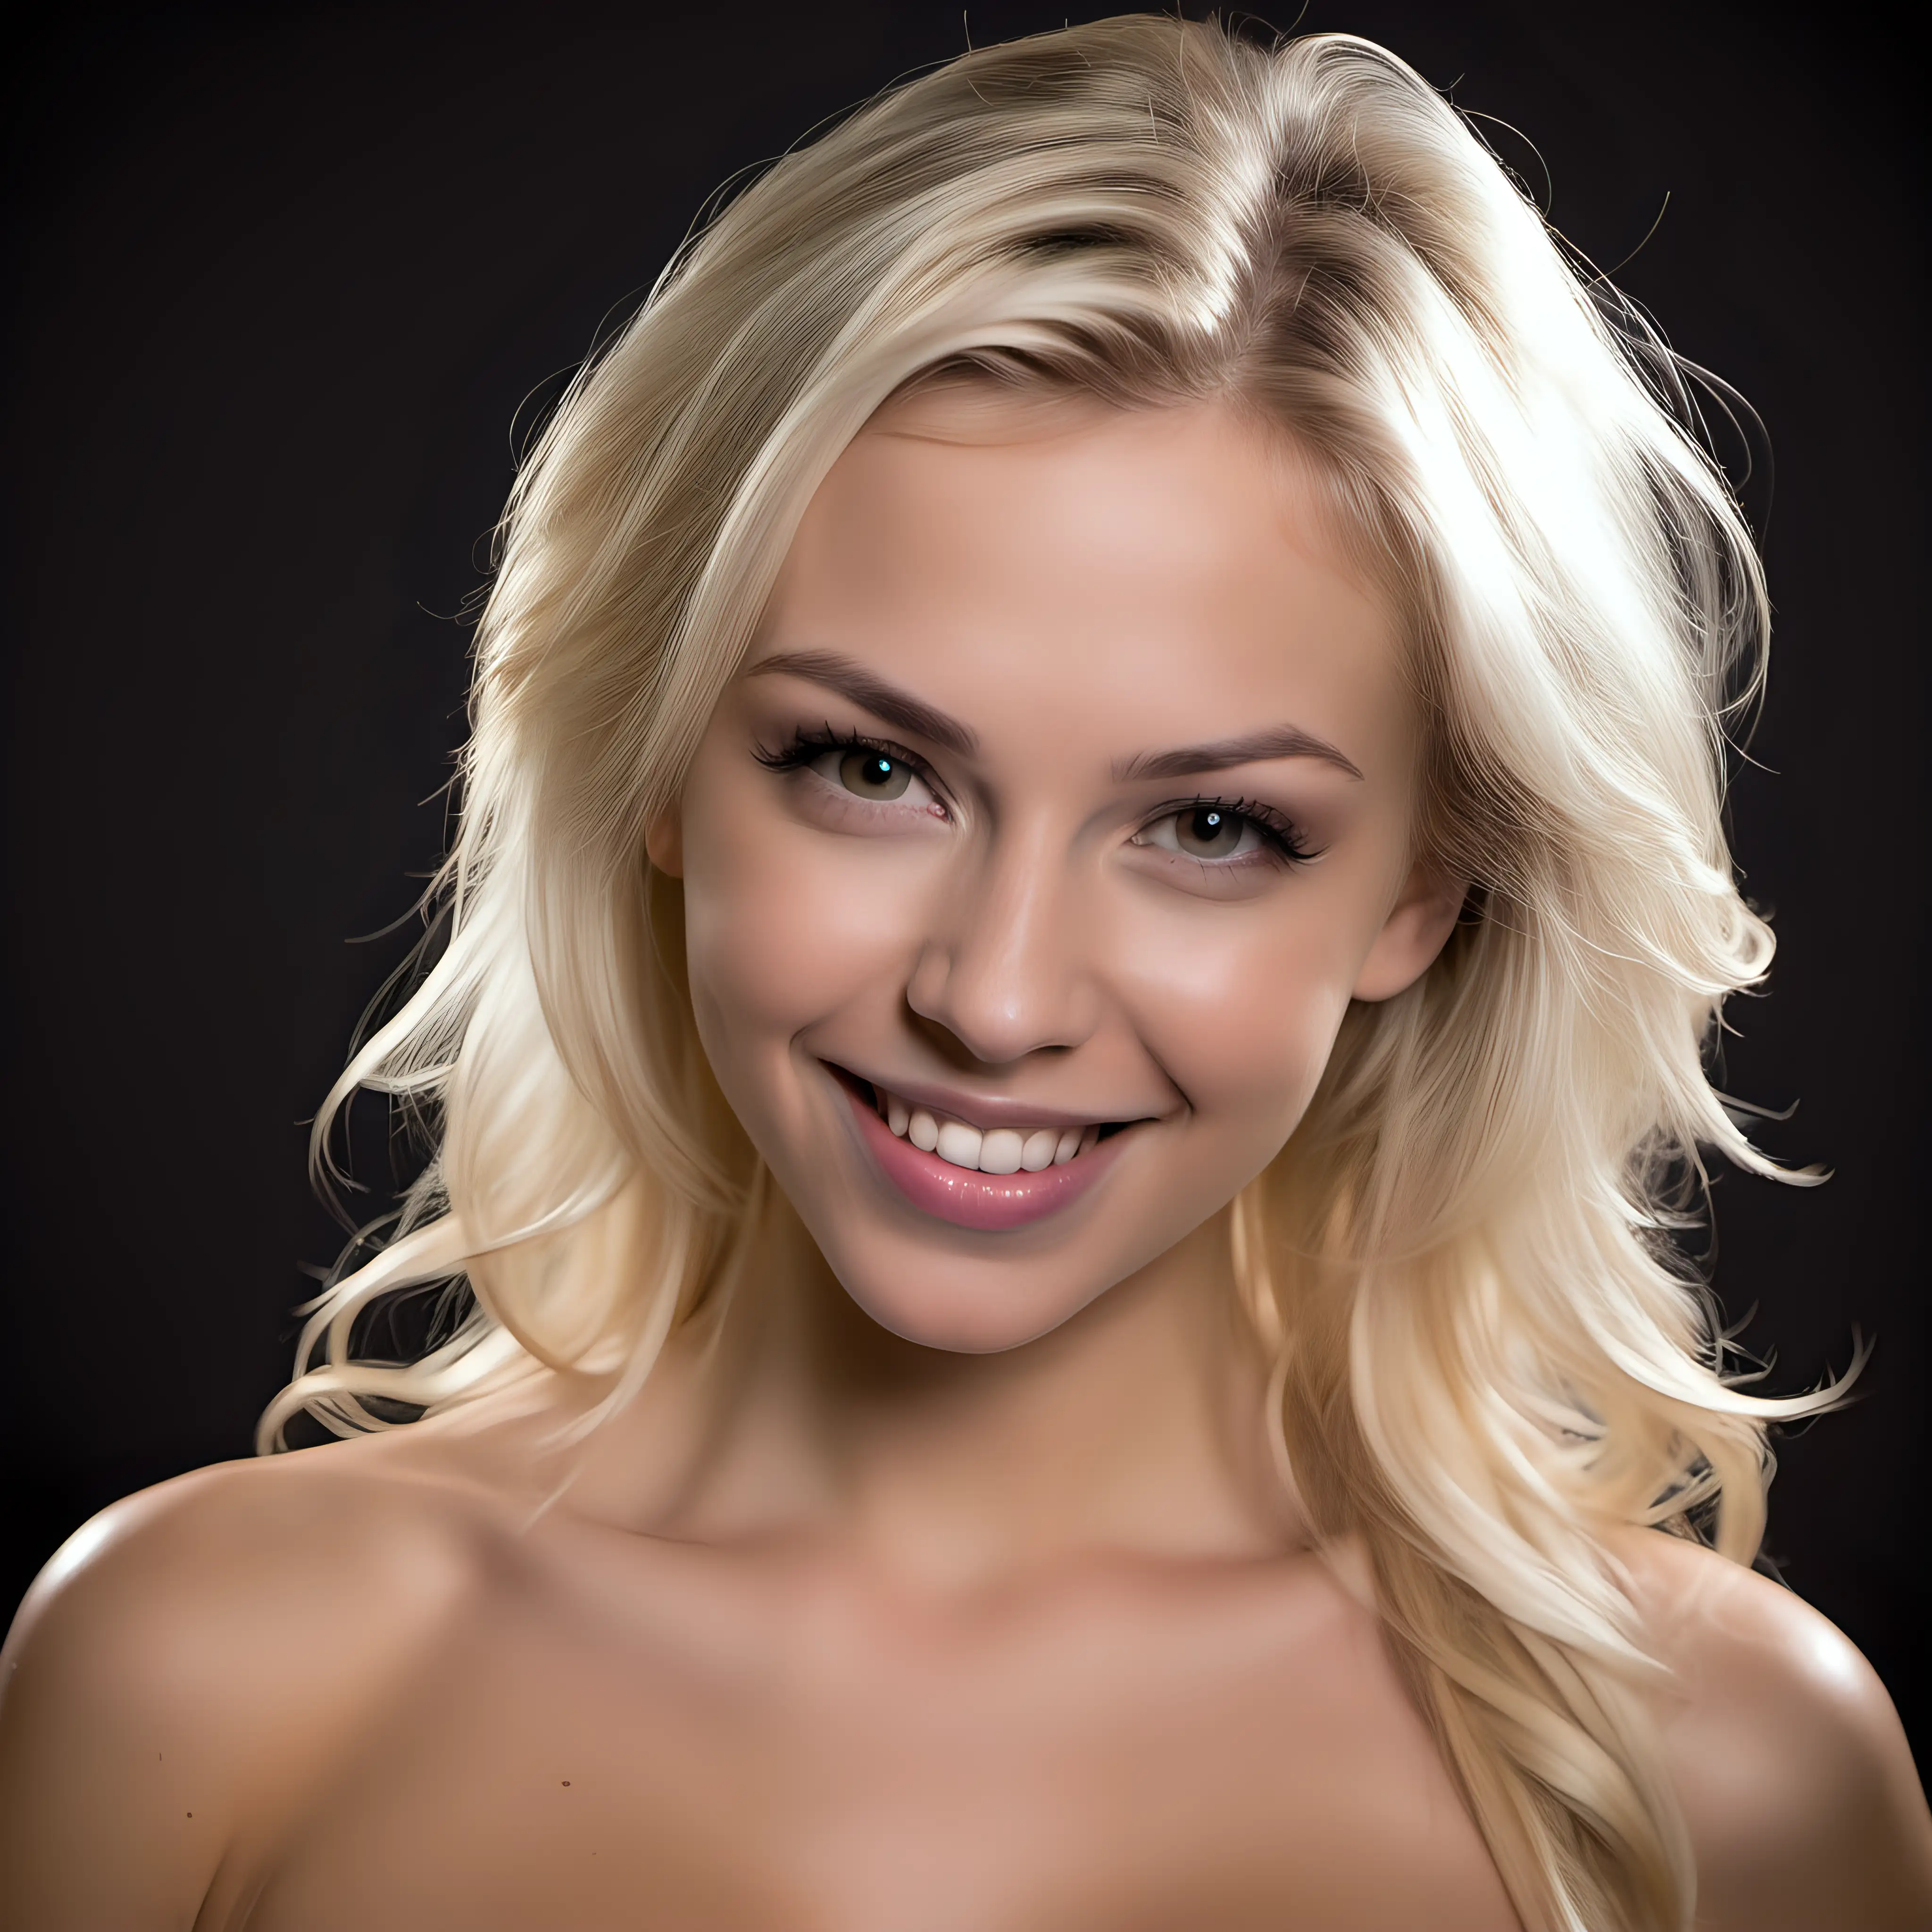 Seductive Blonde Model With A Playful Smile In Elegant Attire Muse Ai